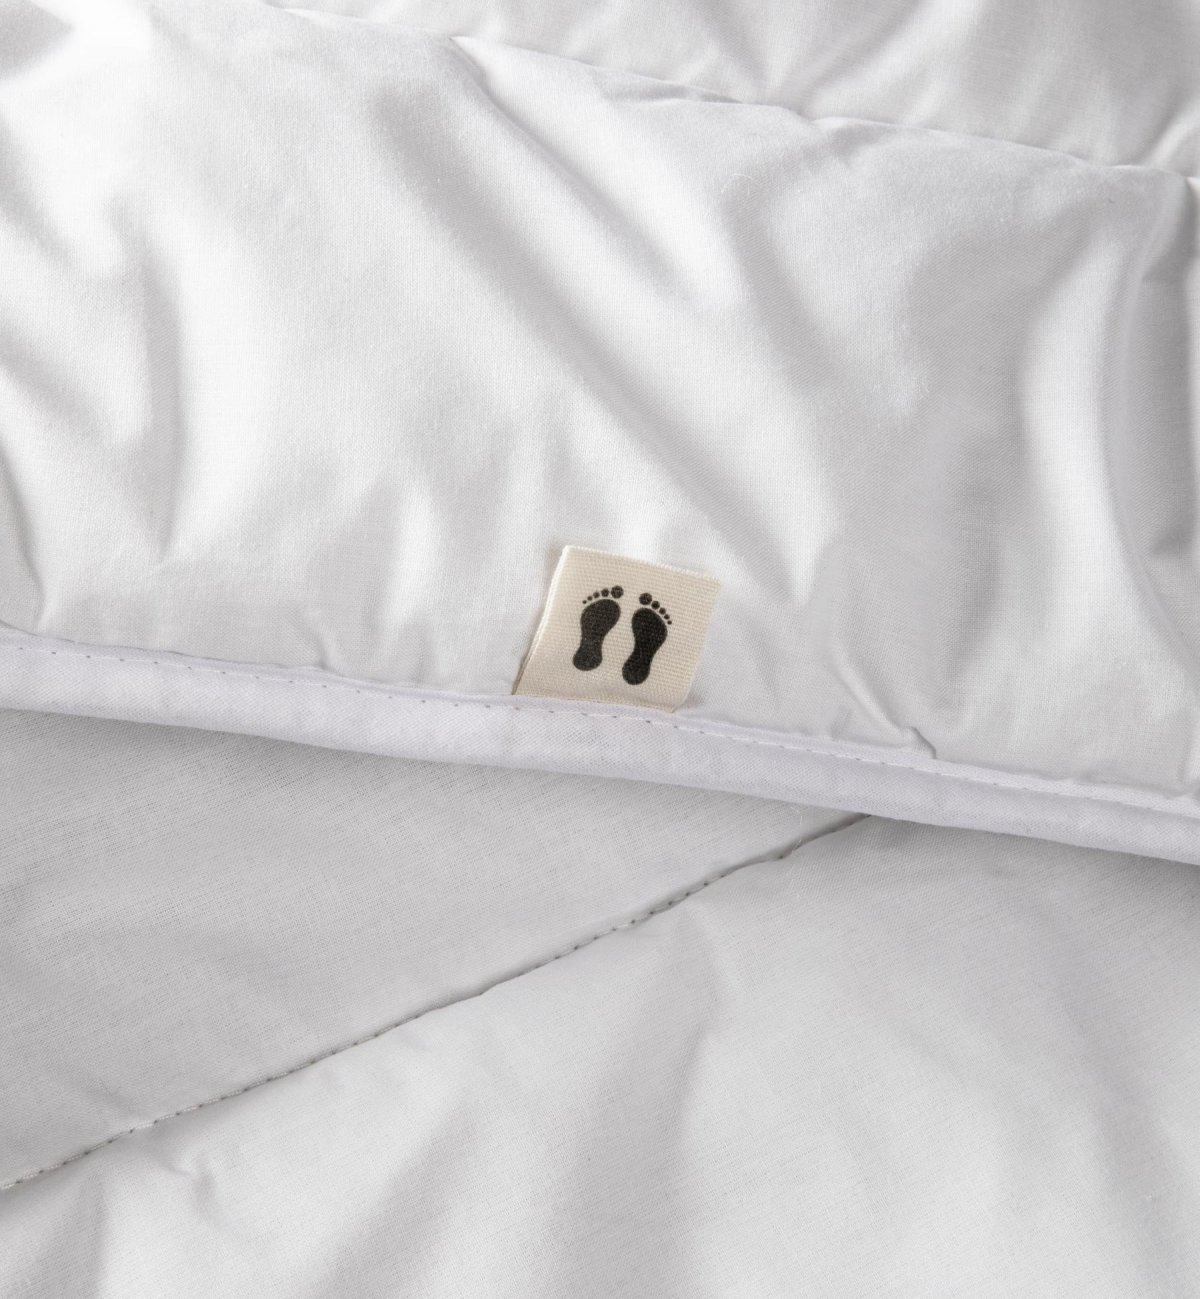 OEKO-TEX® certified Organic Cotton comforter at an affordable price - Made in Europe